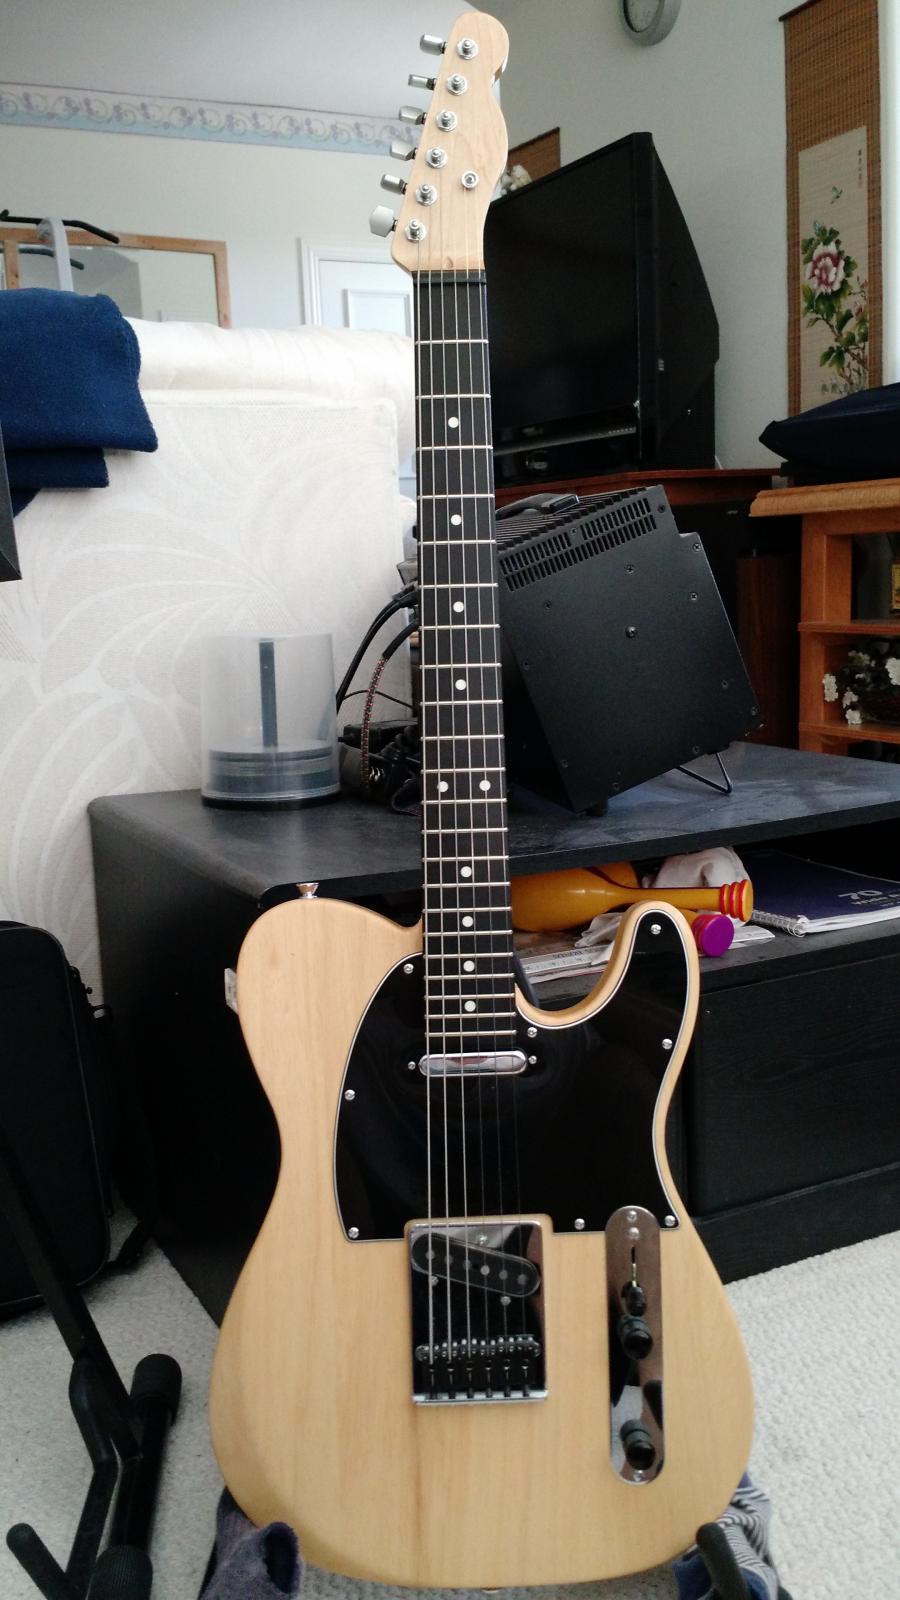 Telecaster Love Thread, No Archtops Allowed-img_20150906_155134006-jpg